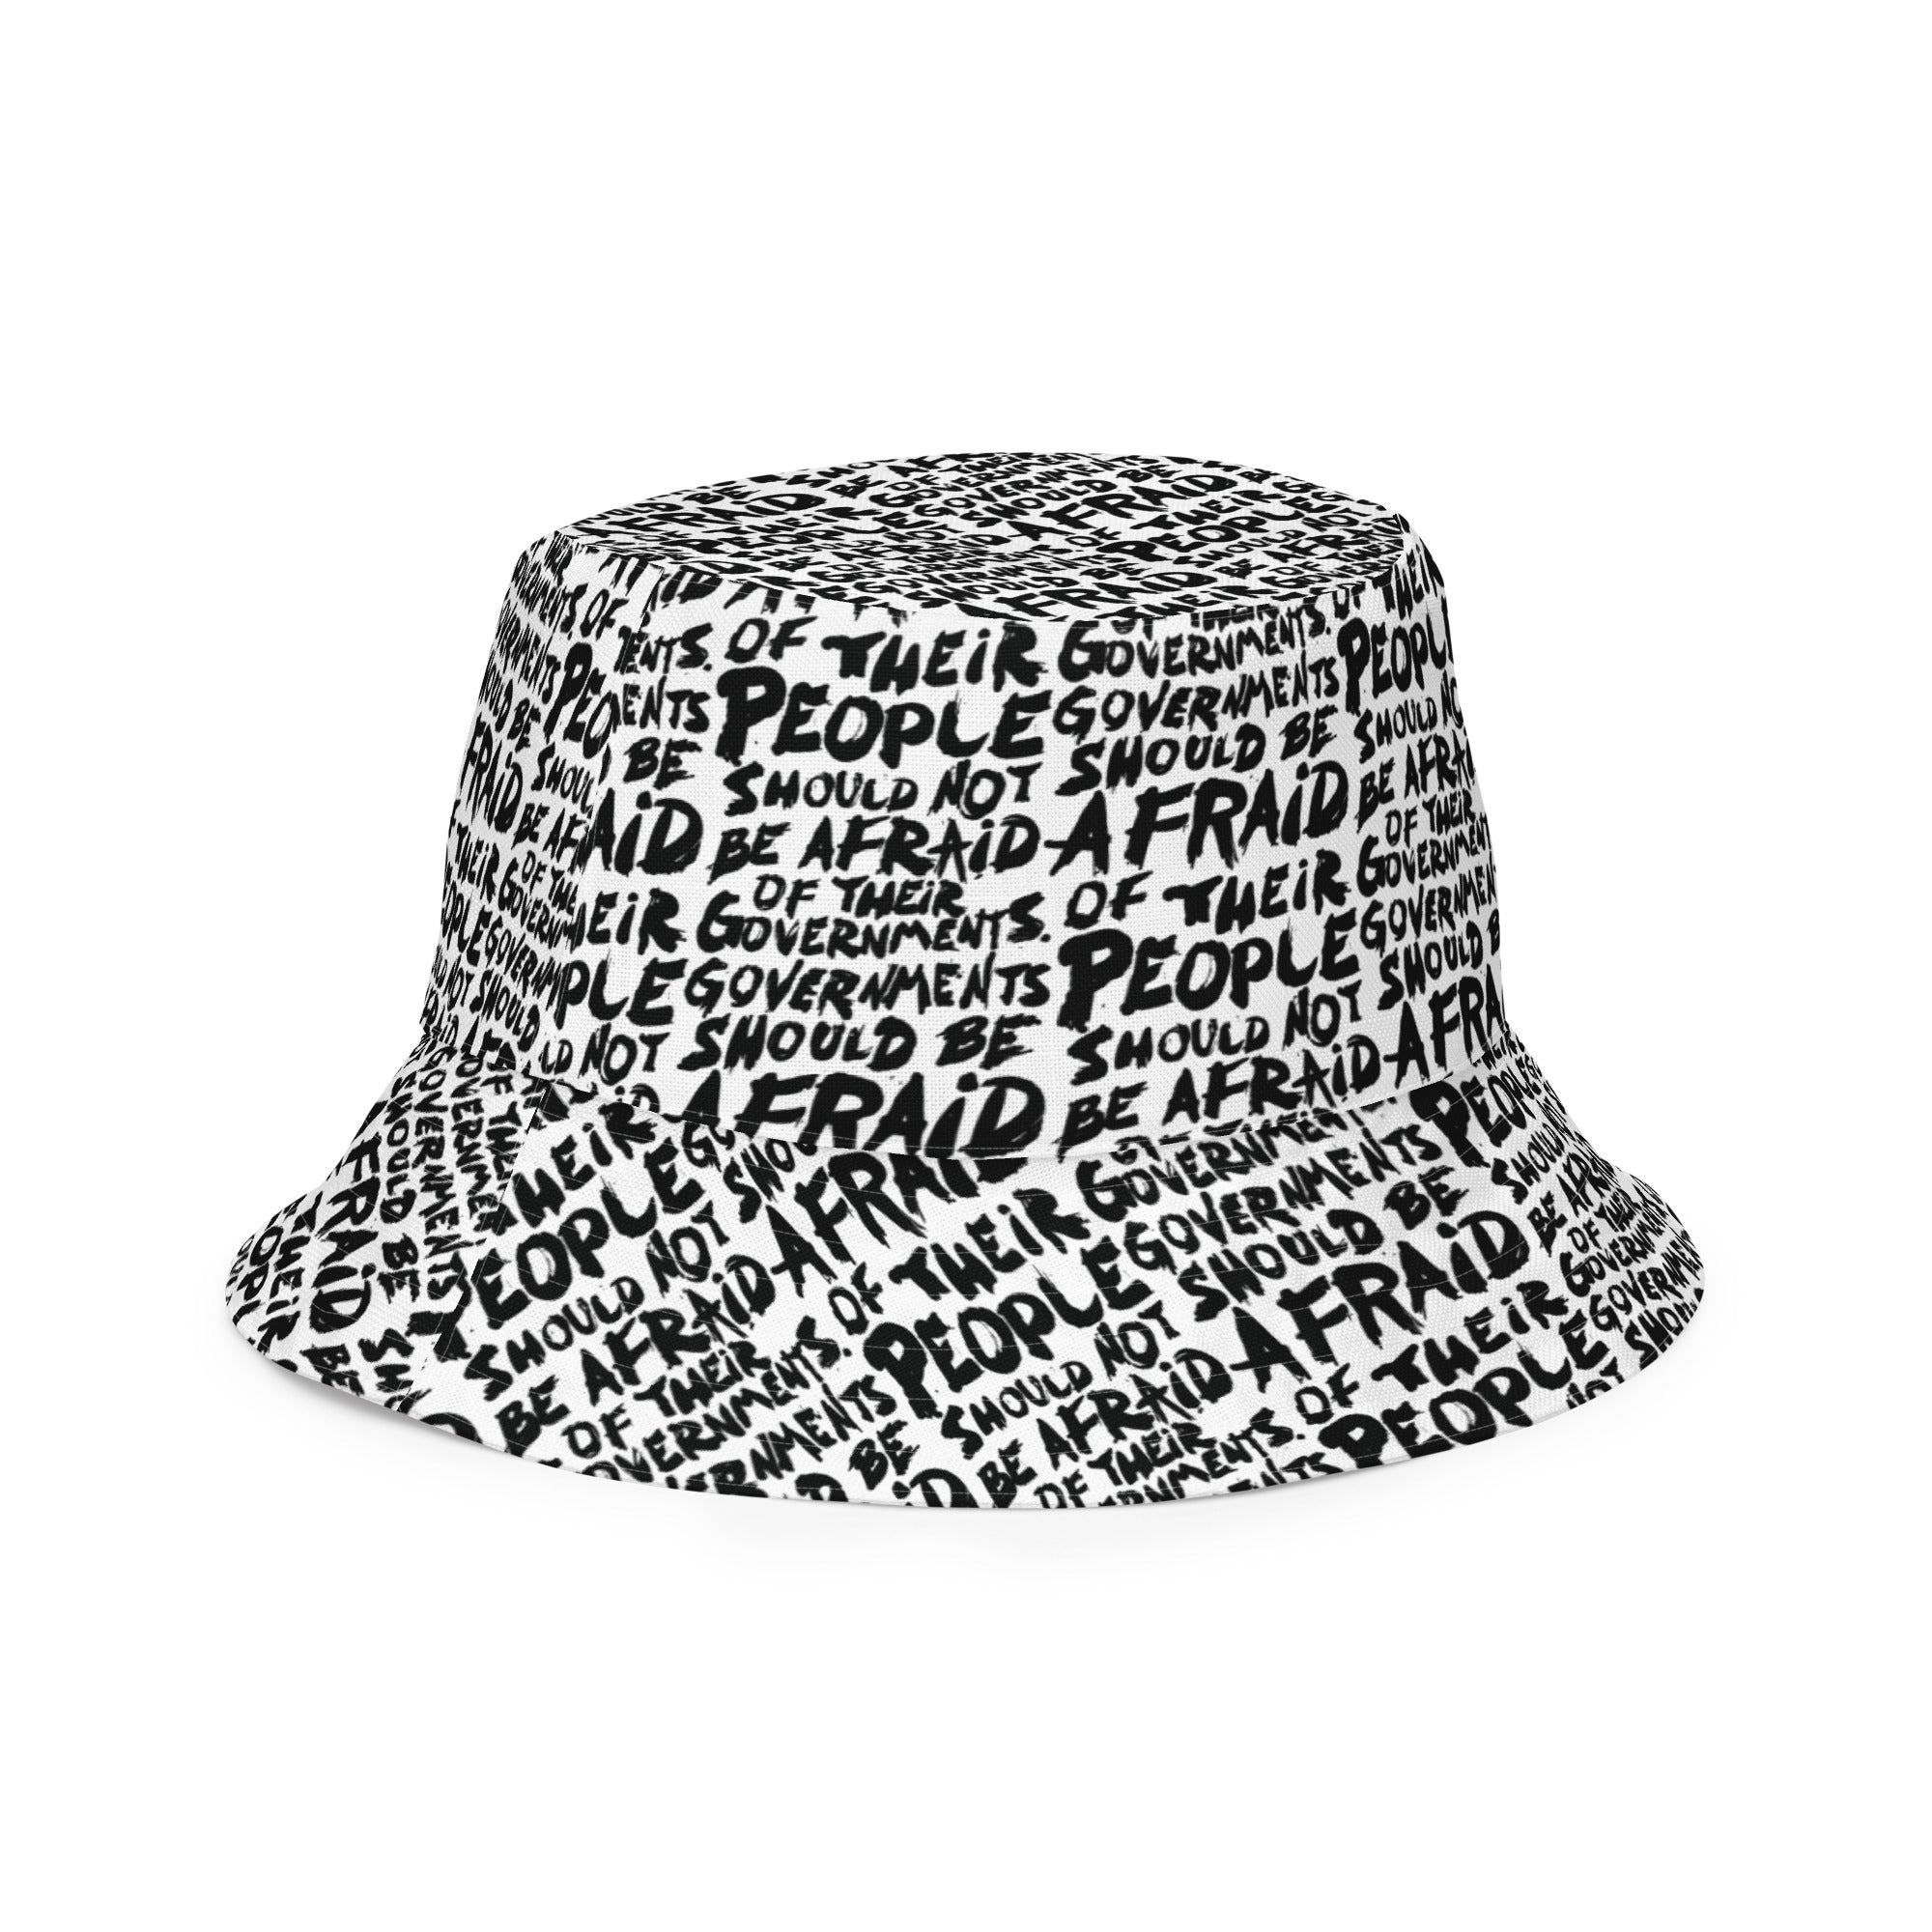 People Should Not Be Afraid of Their Governments Jefferson Quote Reversible Bucket Hat